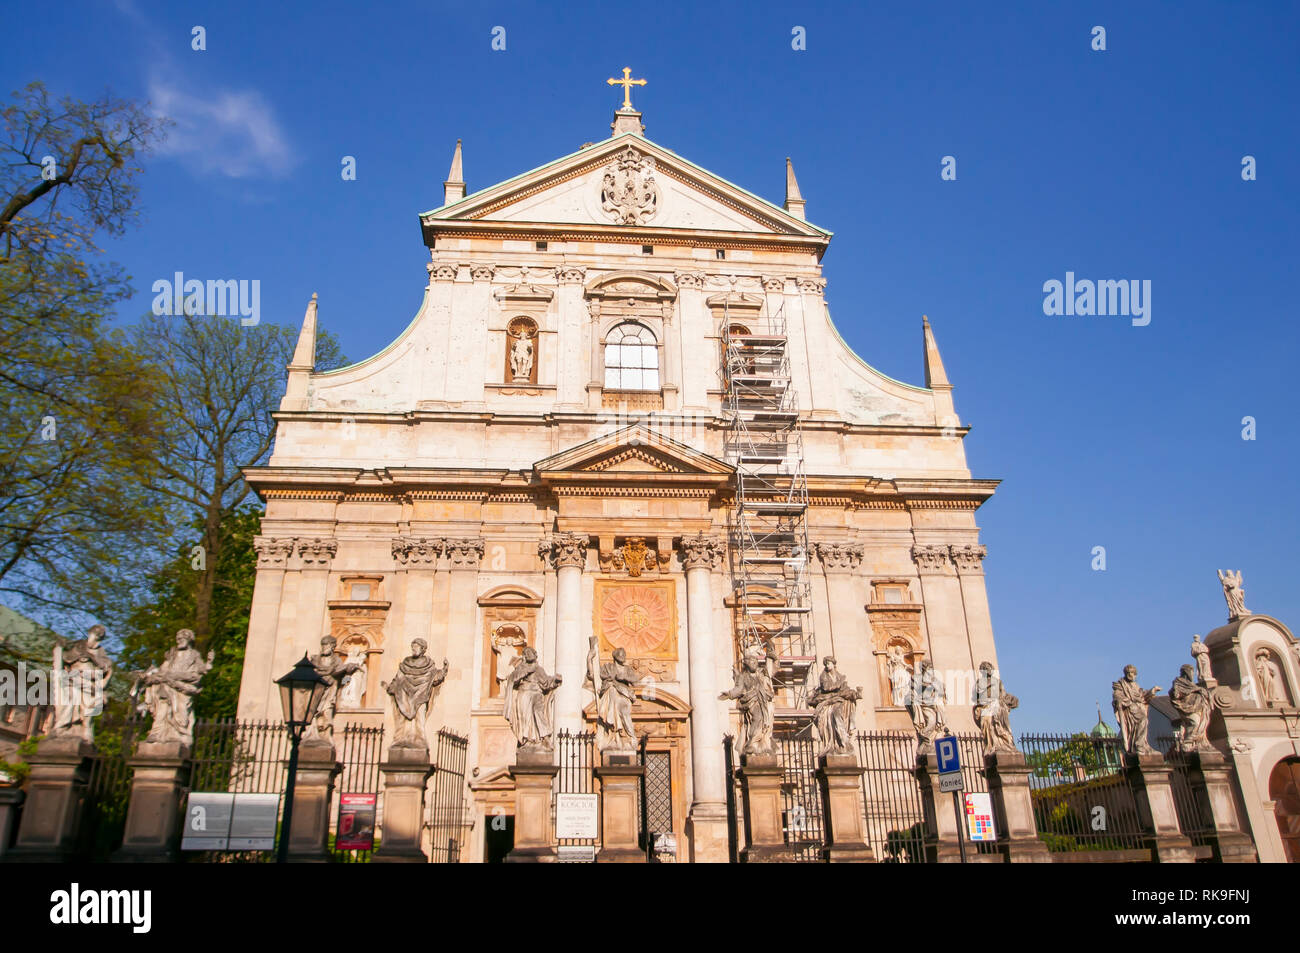 The Church of Saints Peter and Paul (Piotra i Pawla) in the Old Town district of Kraków, Poland Stock Photo